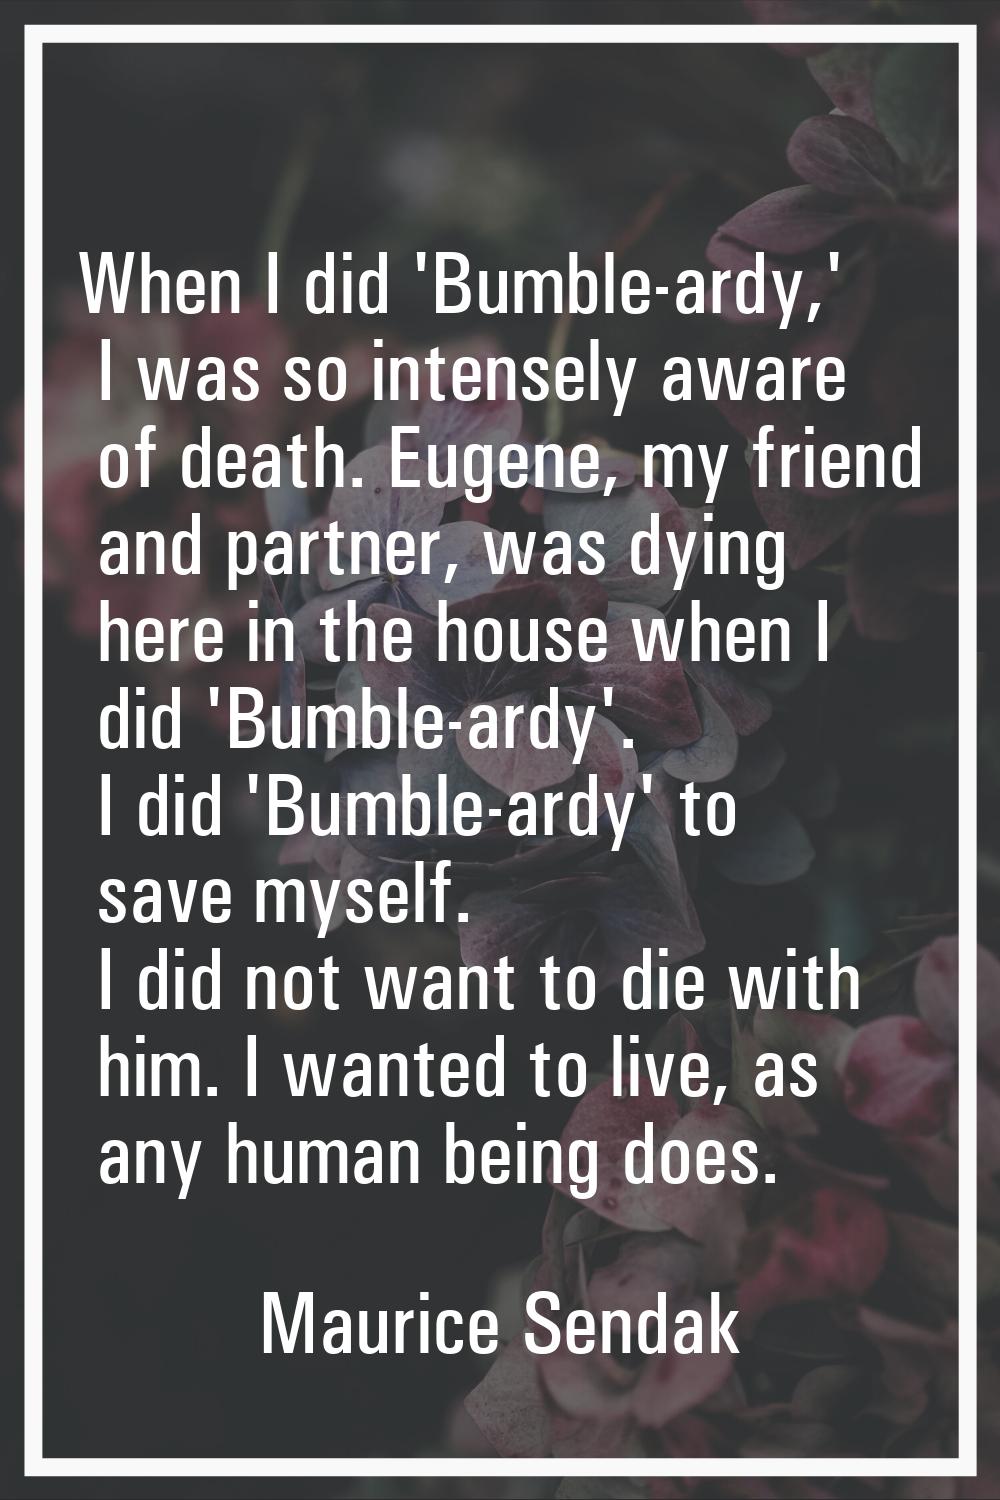 When I did 'Bumble-ardy,' I was so intensely aware of death. Eugene, my friend and partner, was dyi